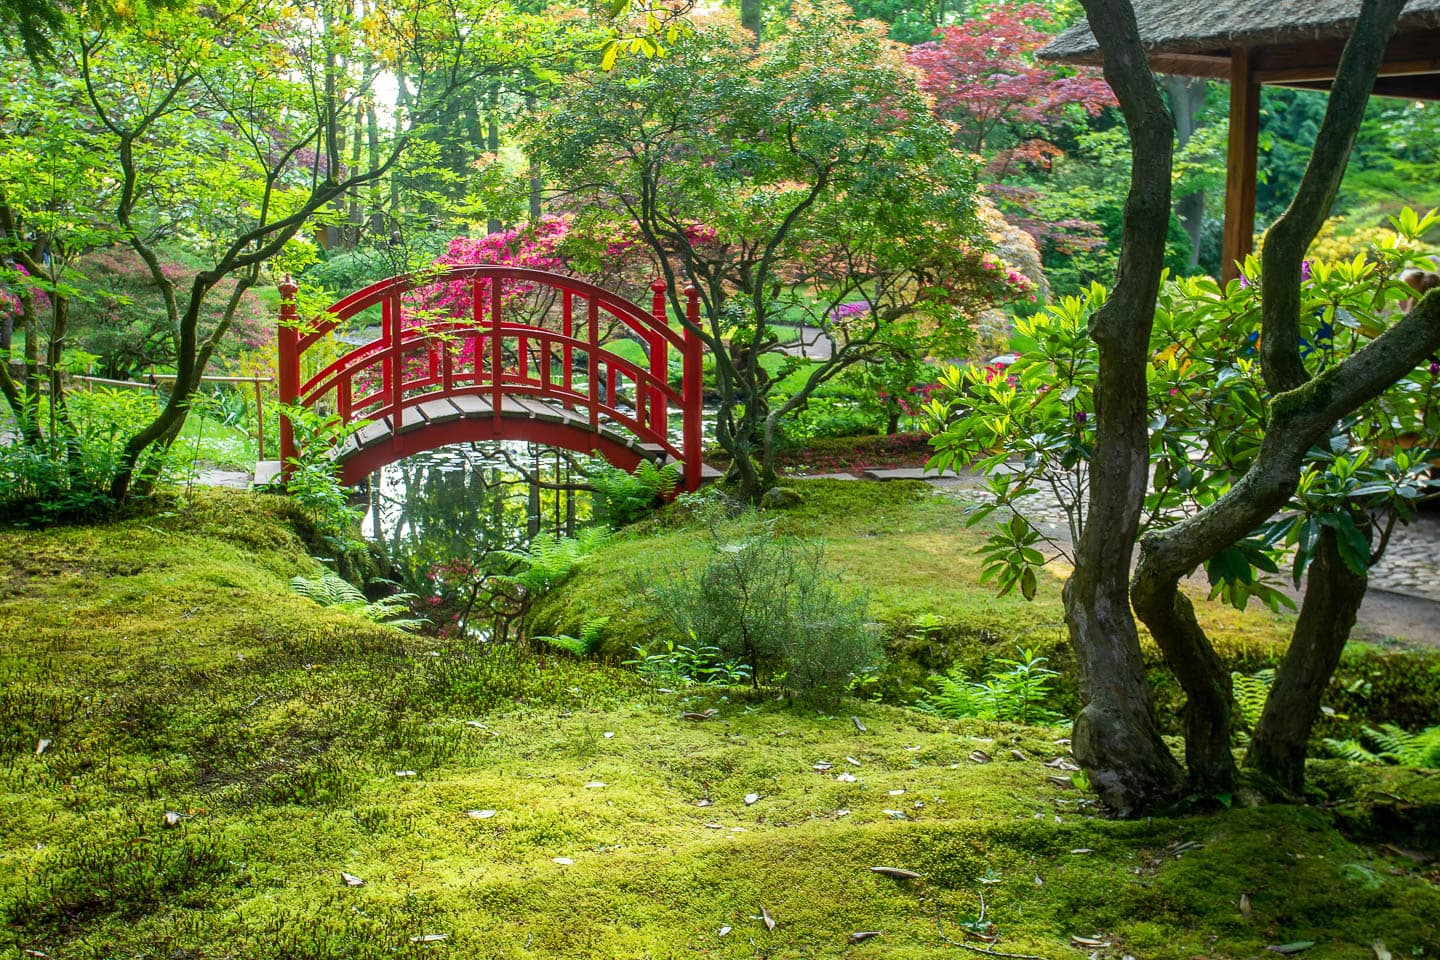 Red Japanese-style bridge with red railings in a zen garden